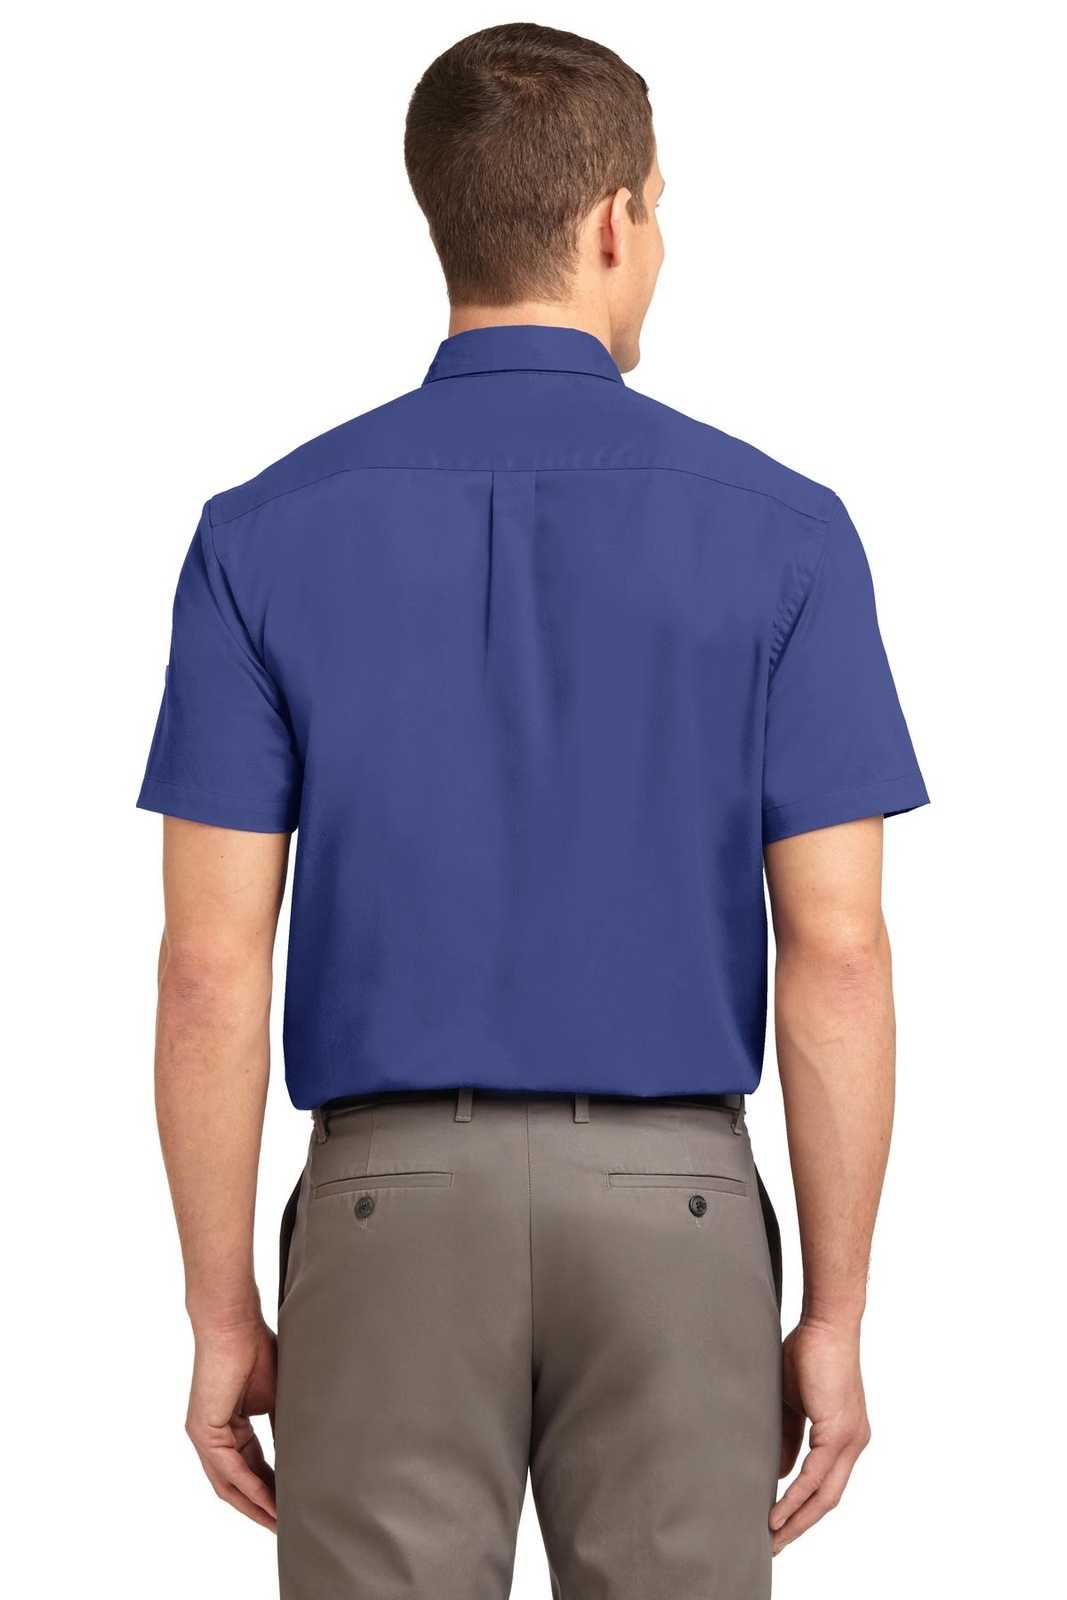 Port Authority S508 Short Sleeve Easy Care Shirt - Mediterranean Blue - HIT a Double - 1